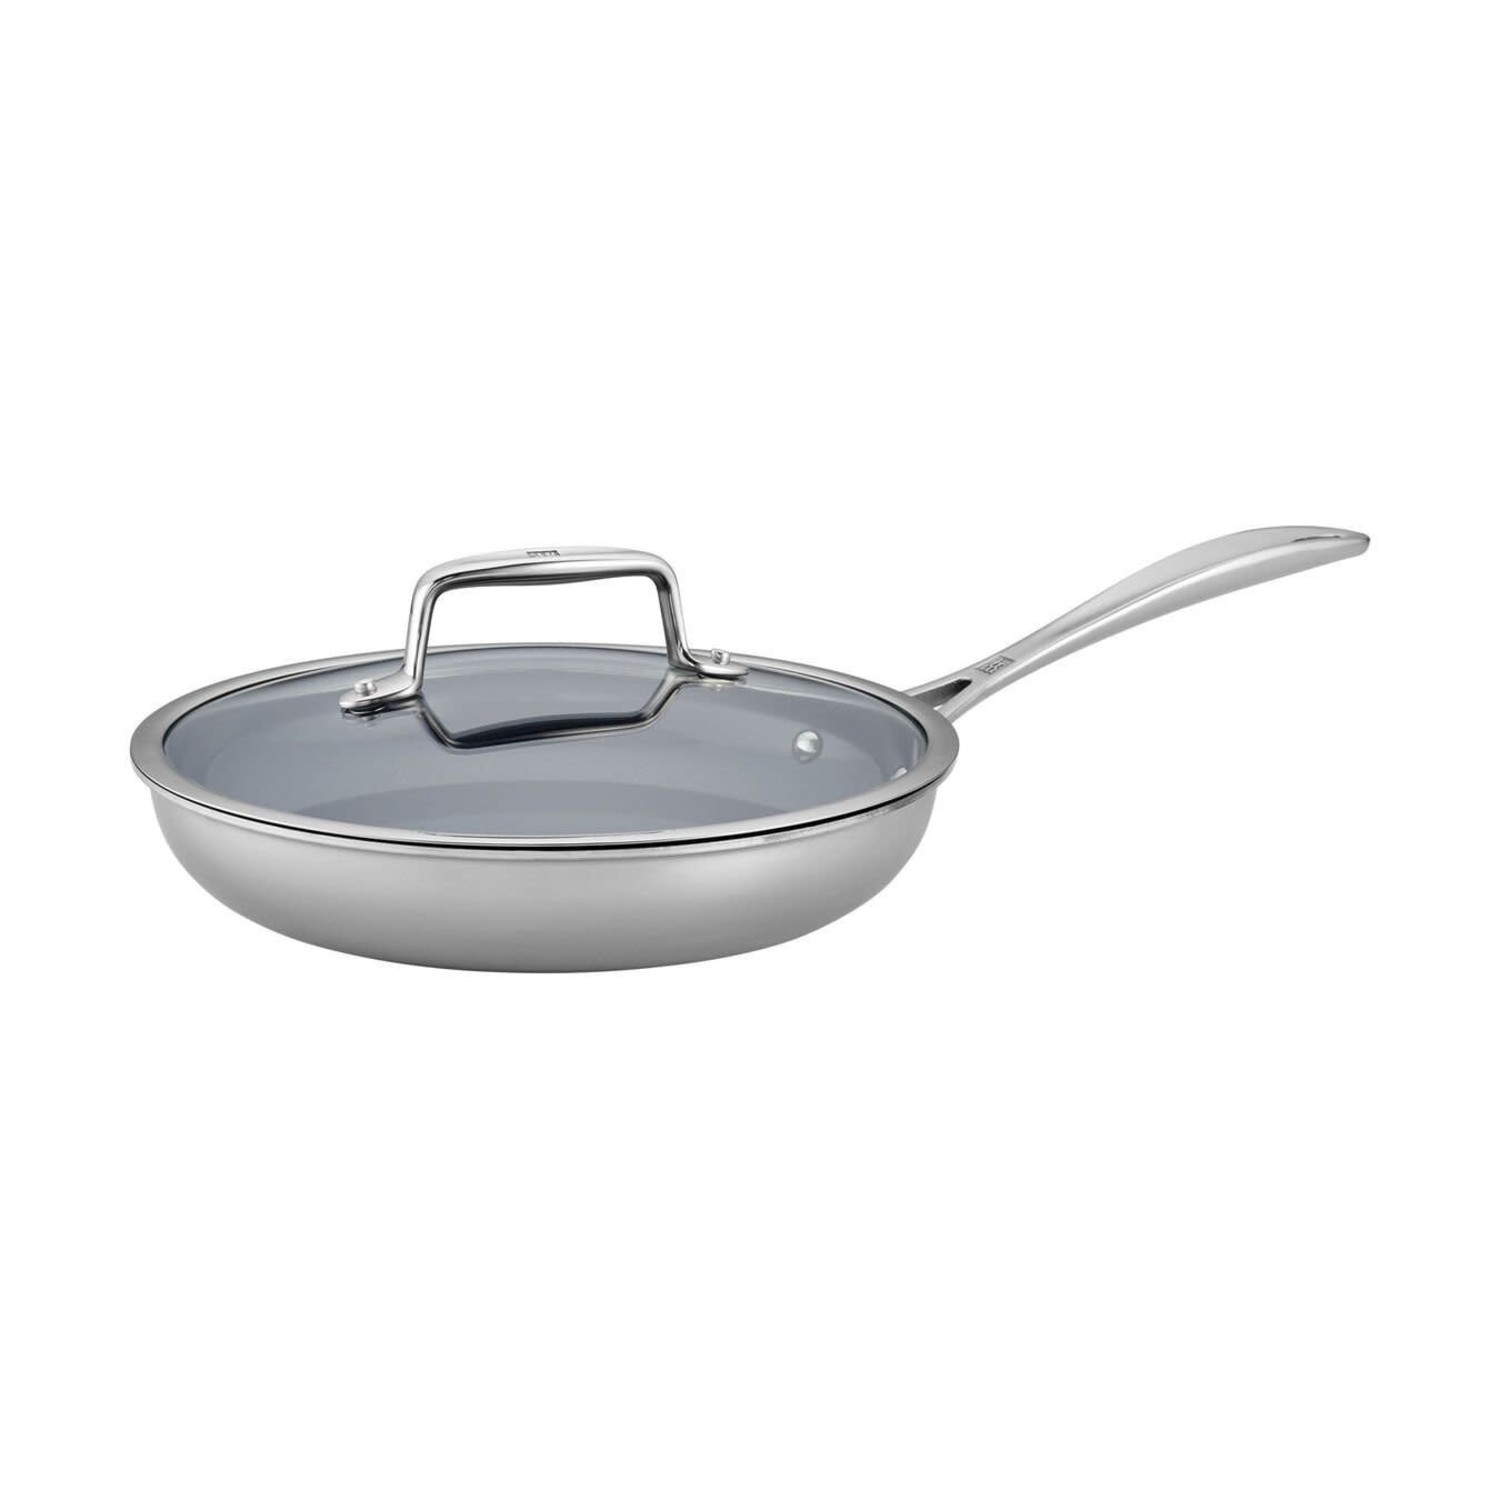 ZWILLING J.A. Henckels Clad Xtreme 12 Ceramic Fry Pan + Reviews